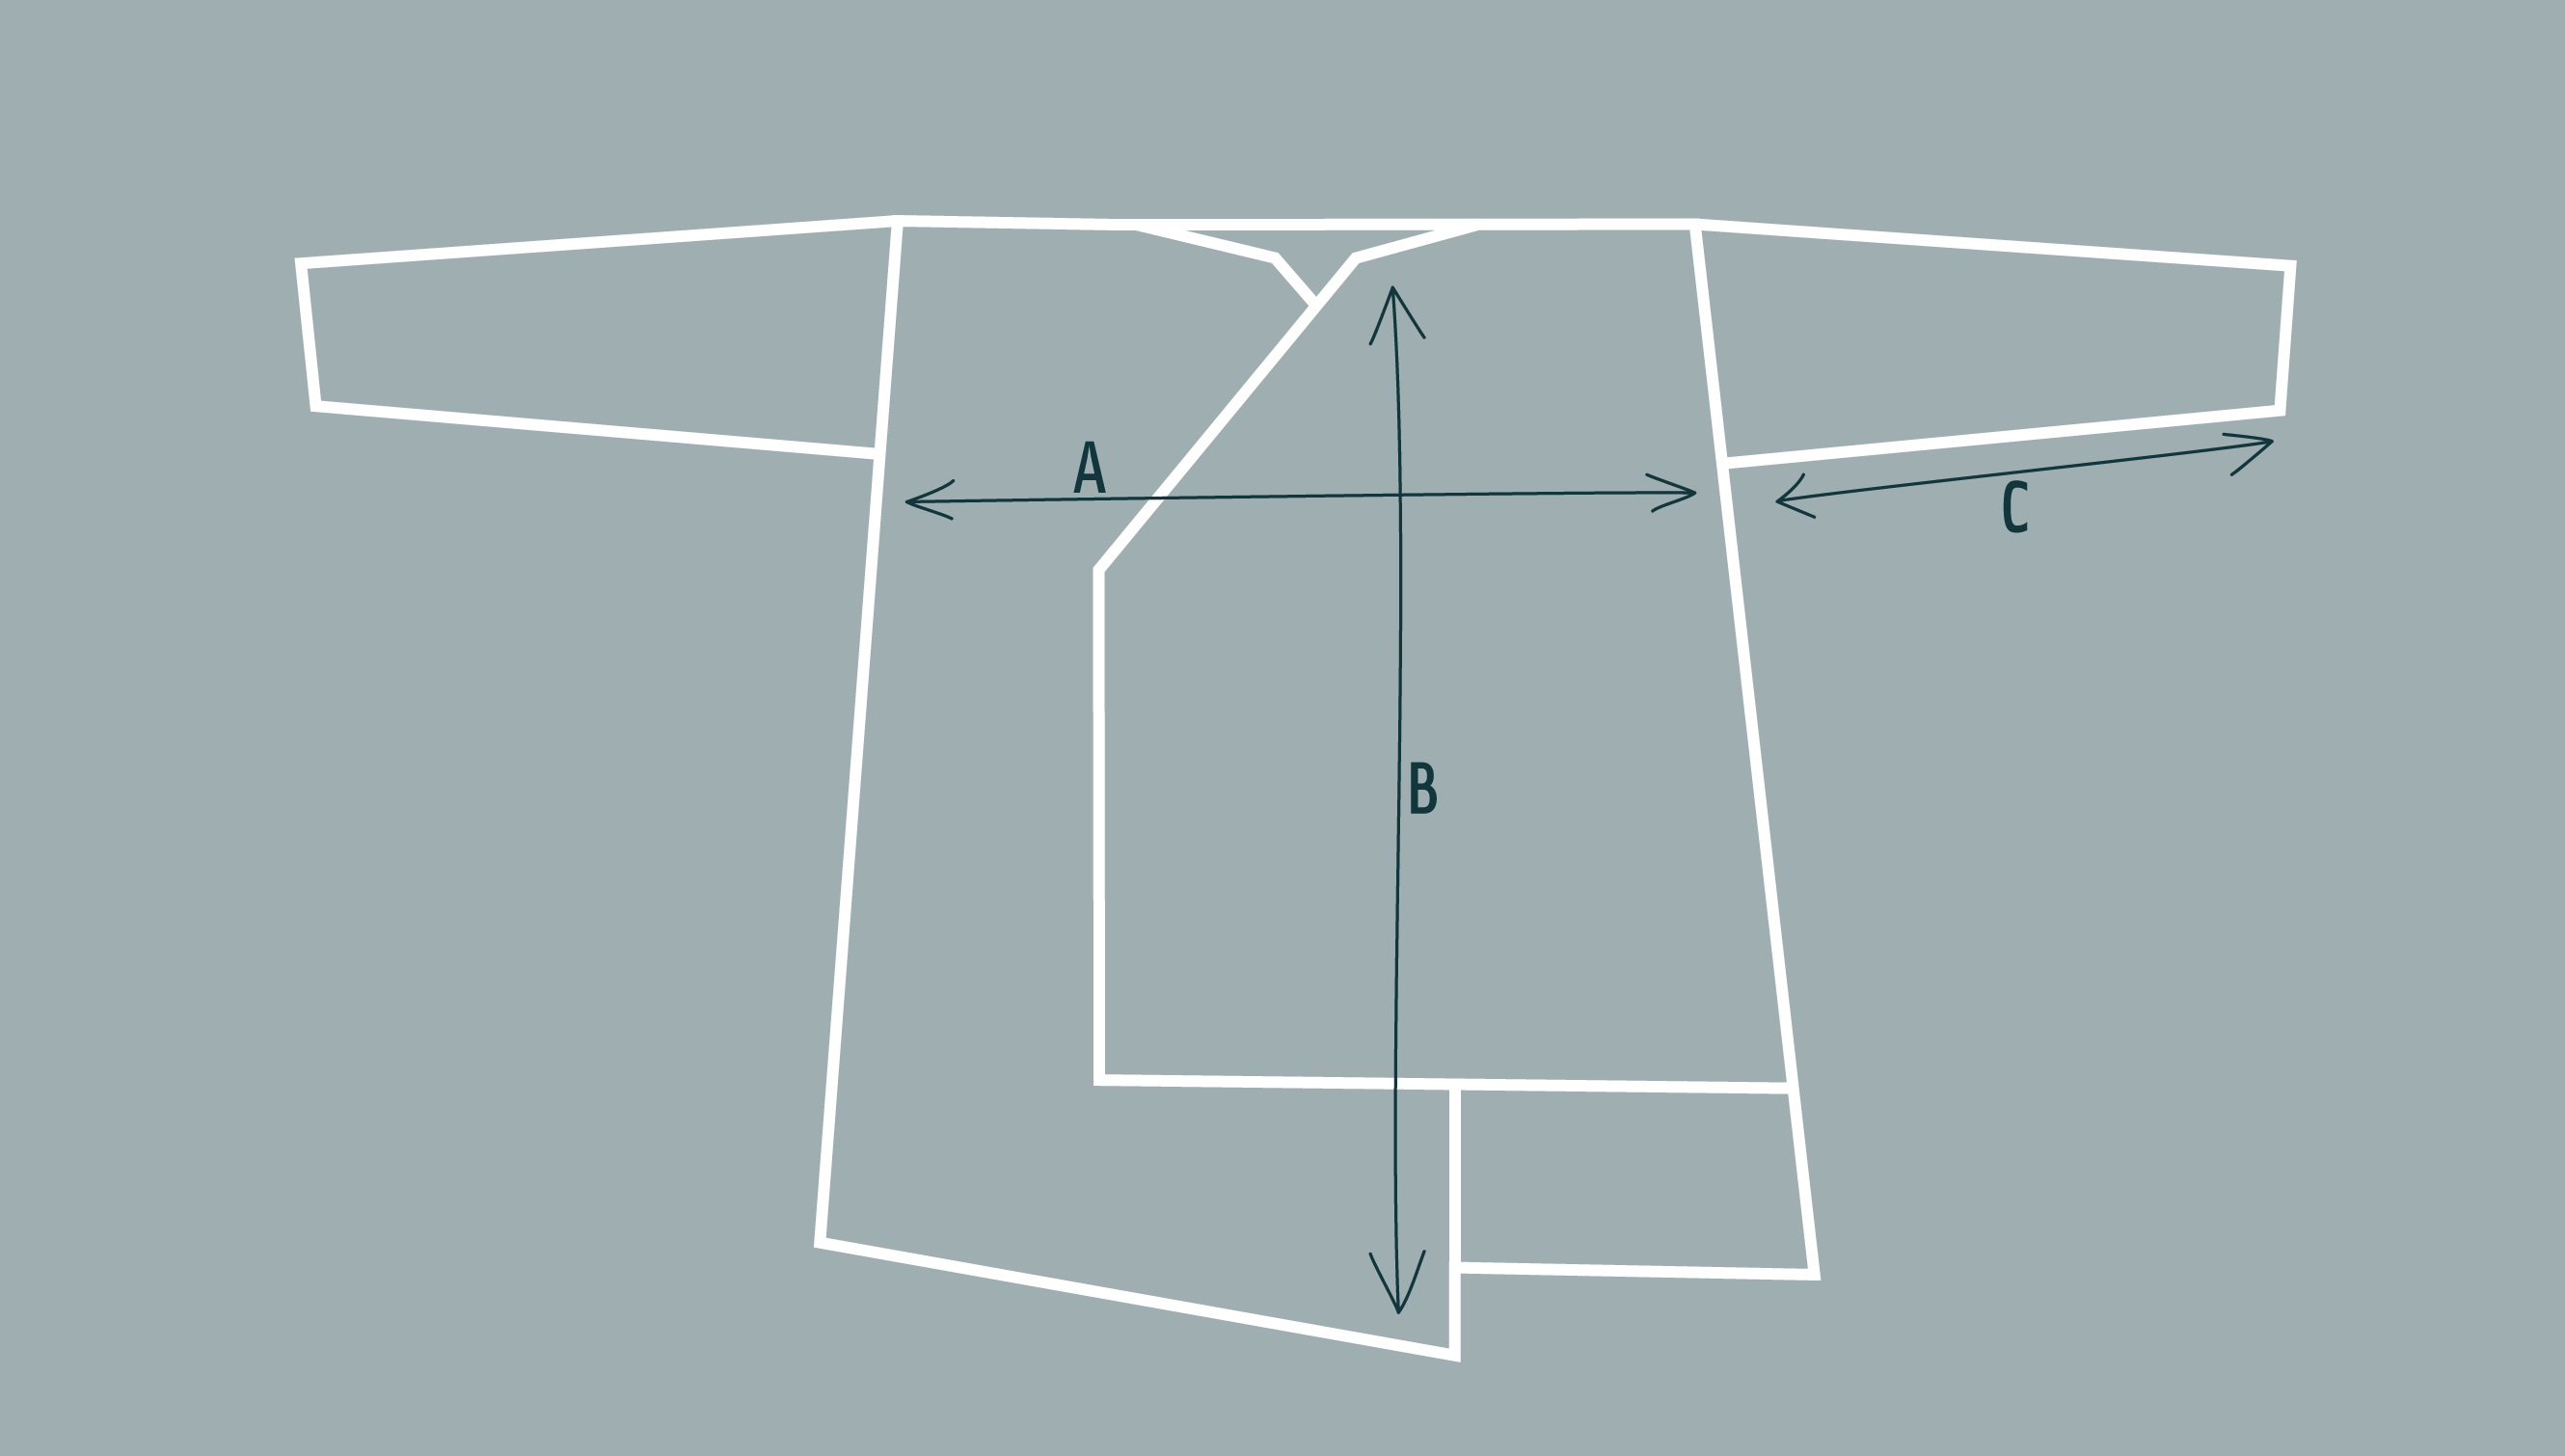 Inklines asymmetric coatigan jacket - diagram to show dimensions and shape